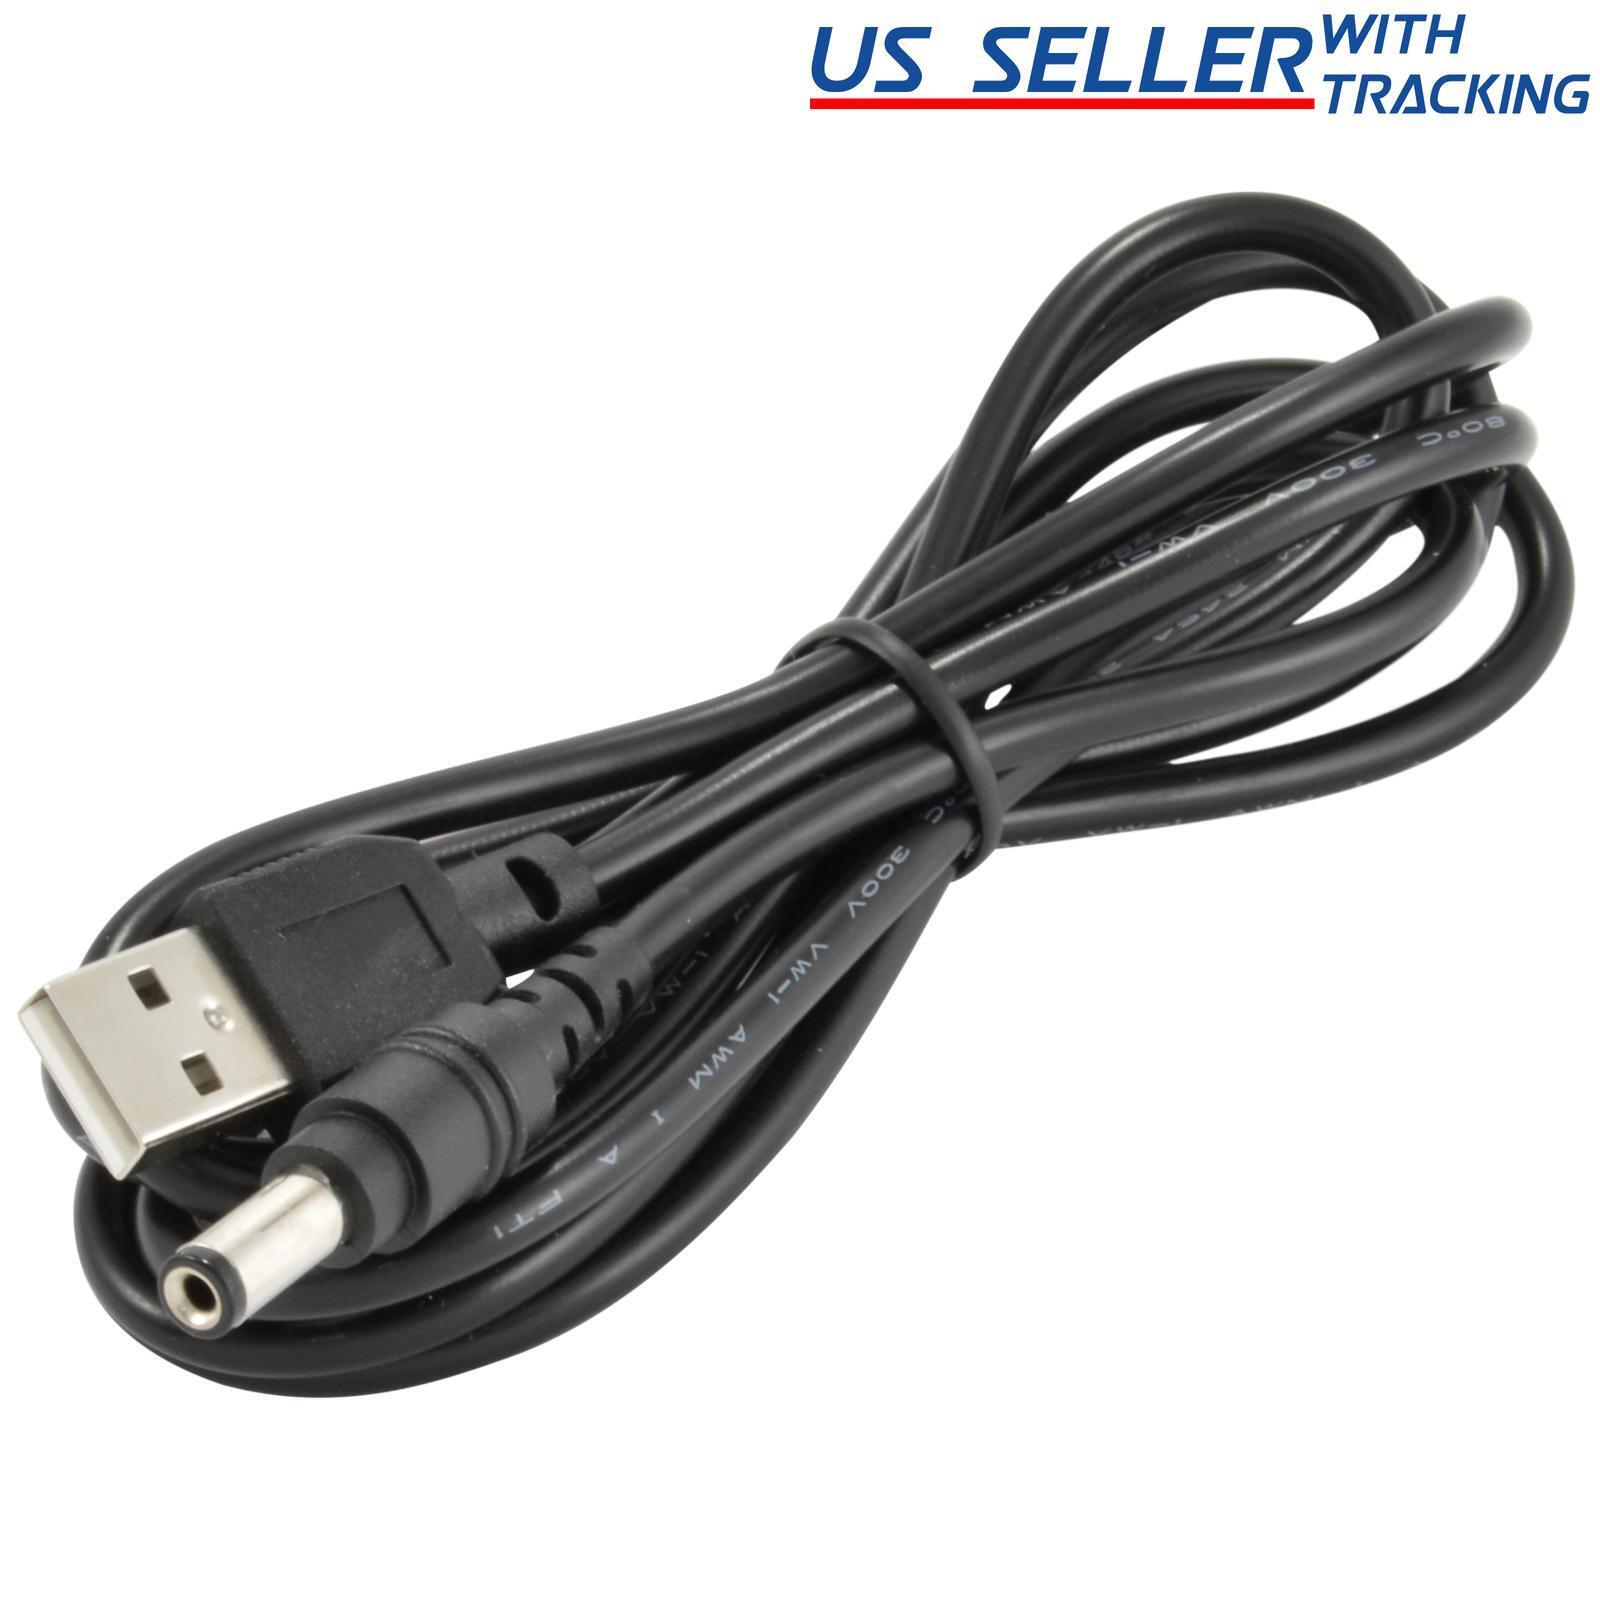 5X USB Male to 5.5mm x 2.1mm Barrel 5V DC Power Cable, High Quality 20AWG, 5ft